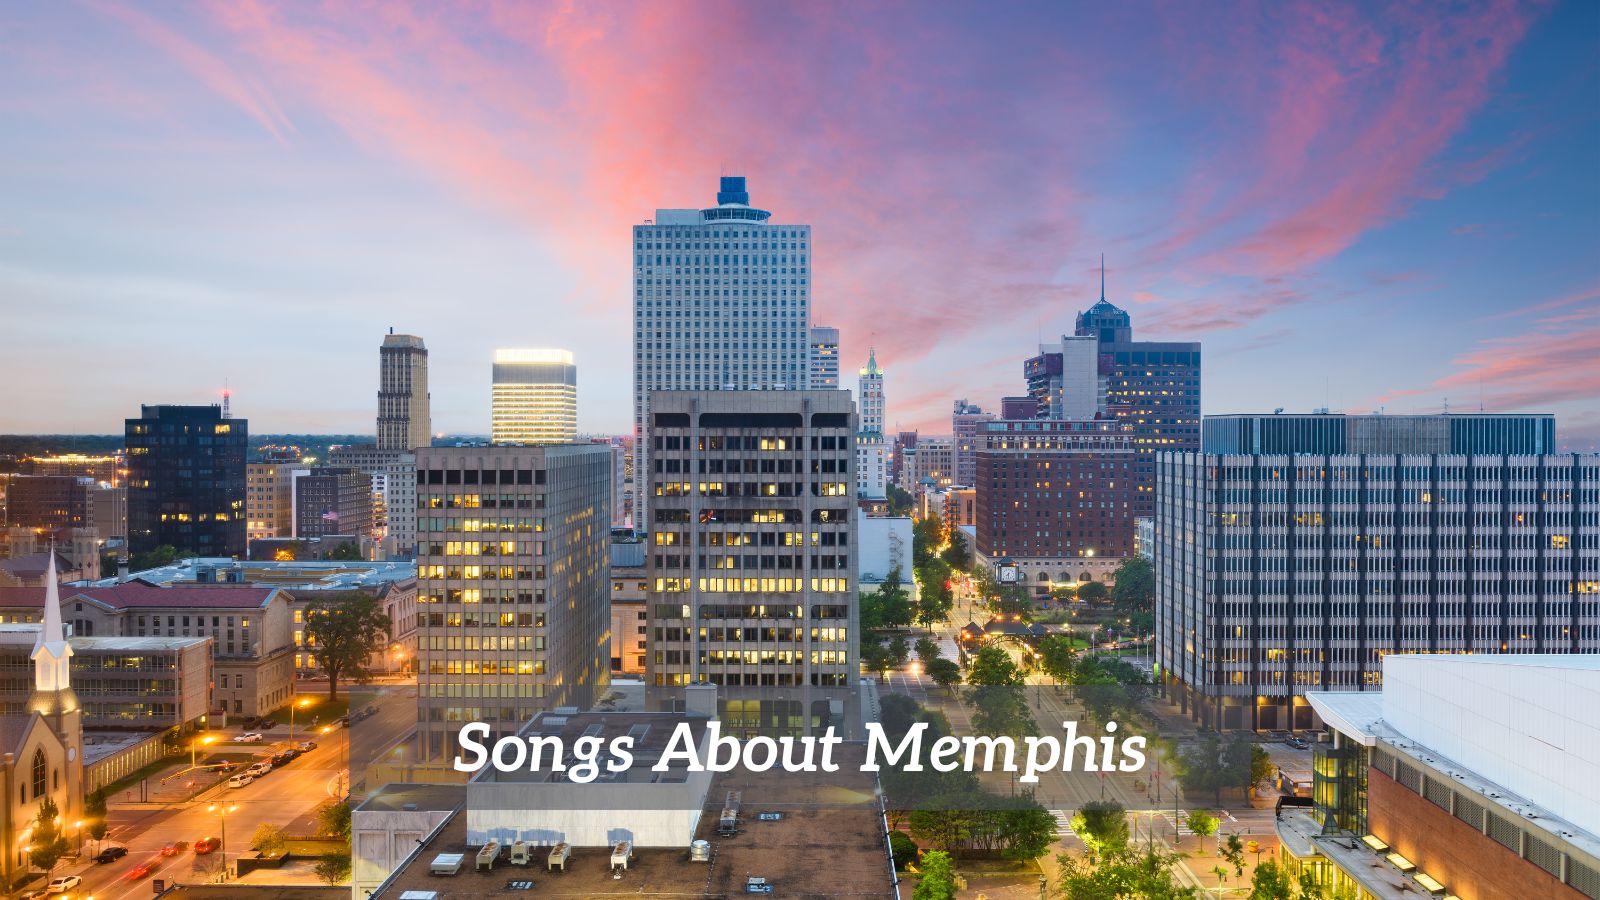 Songs About Memphis